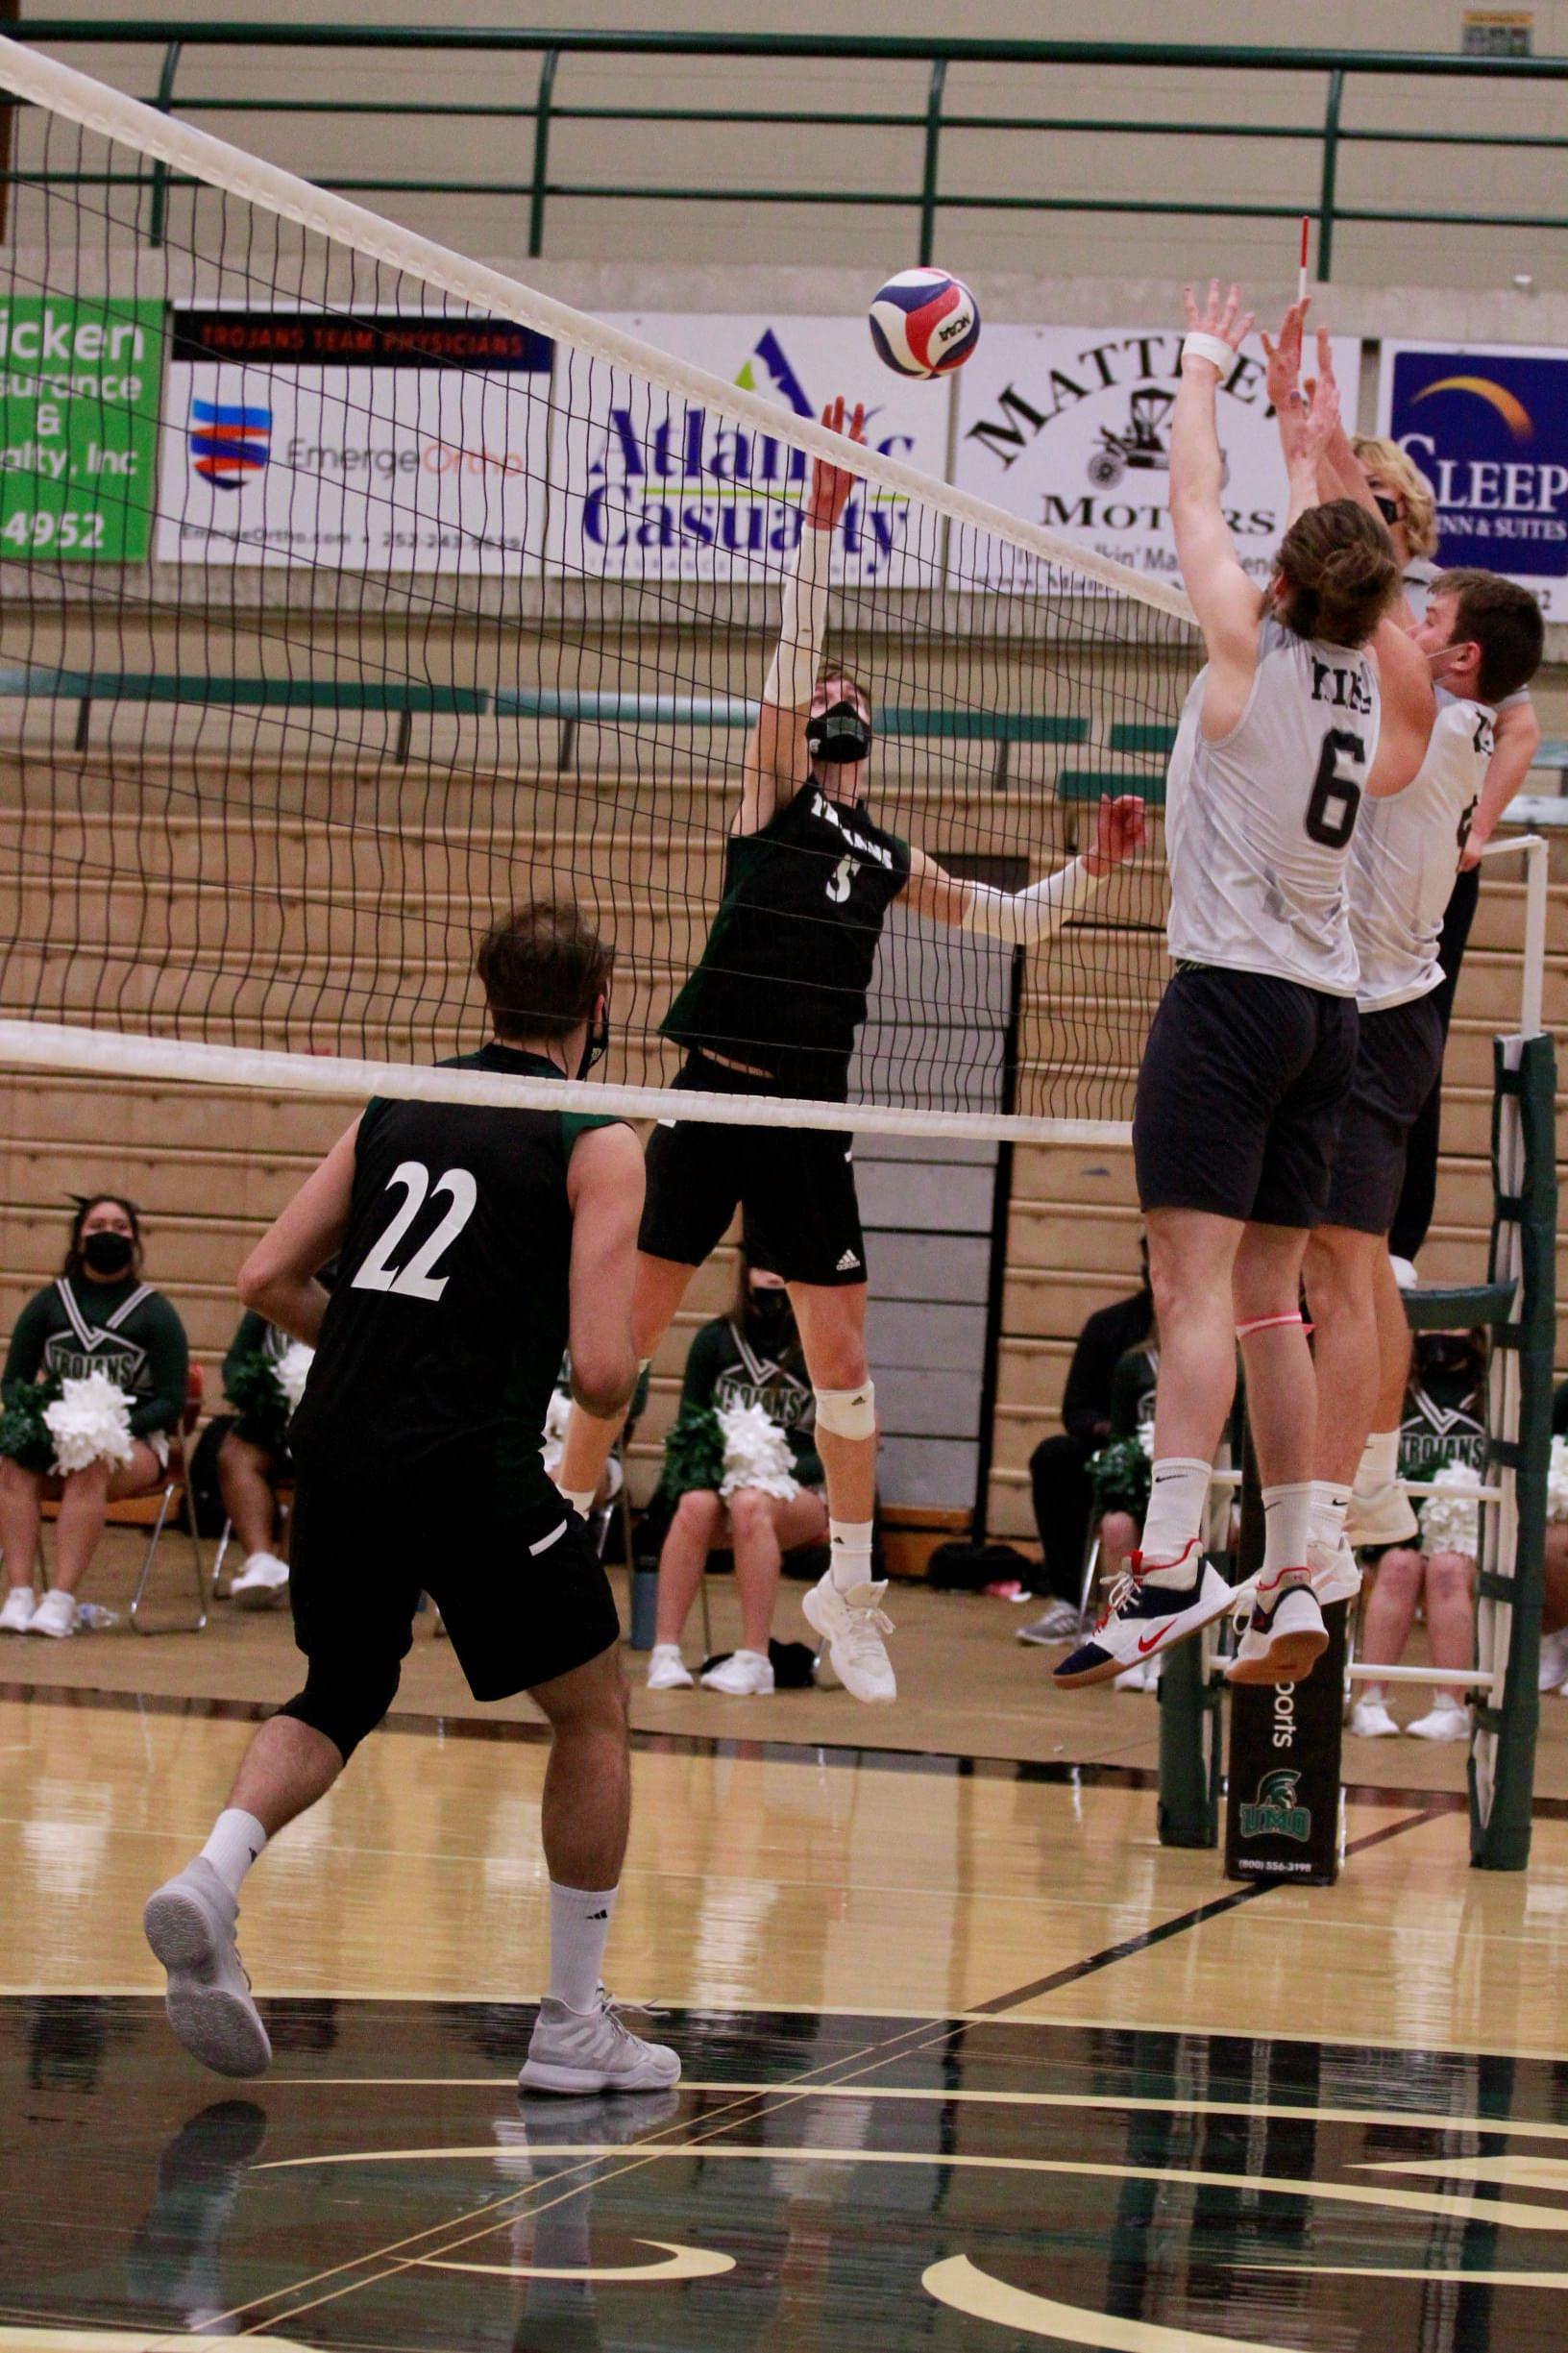 Men’s Volleyball: King University At UMO (PHOTO GALLERY)